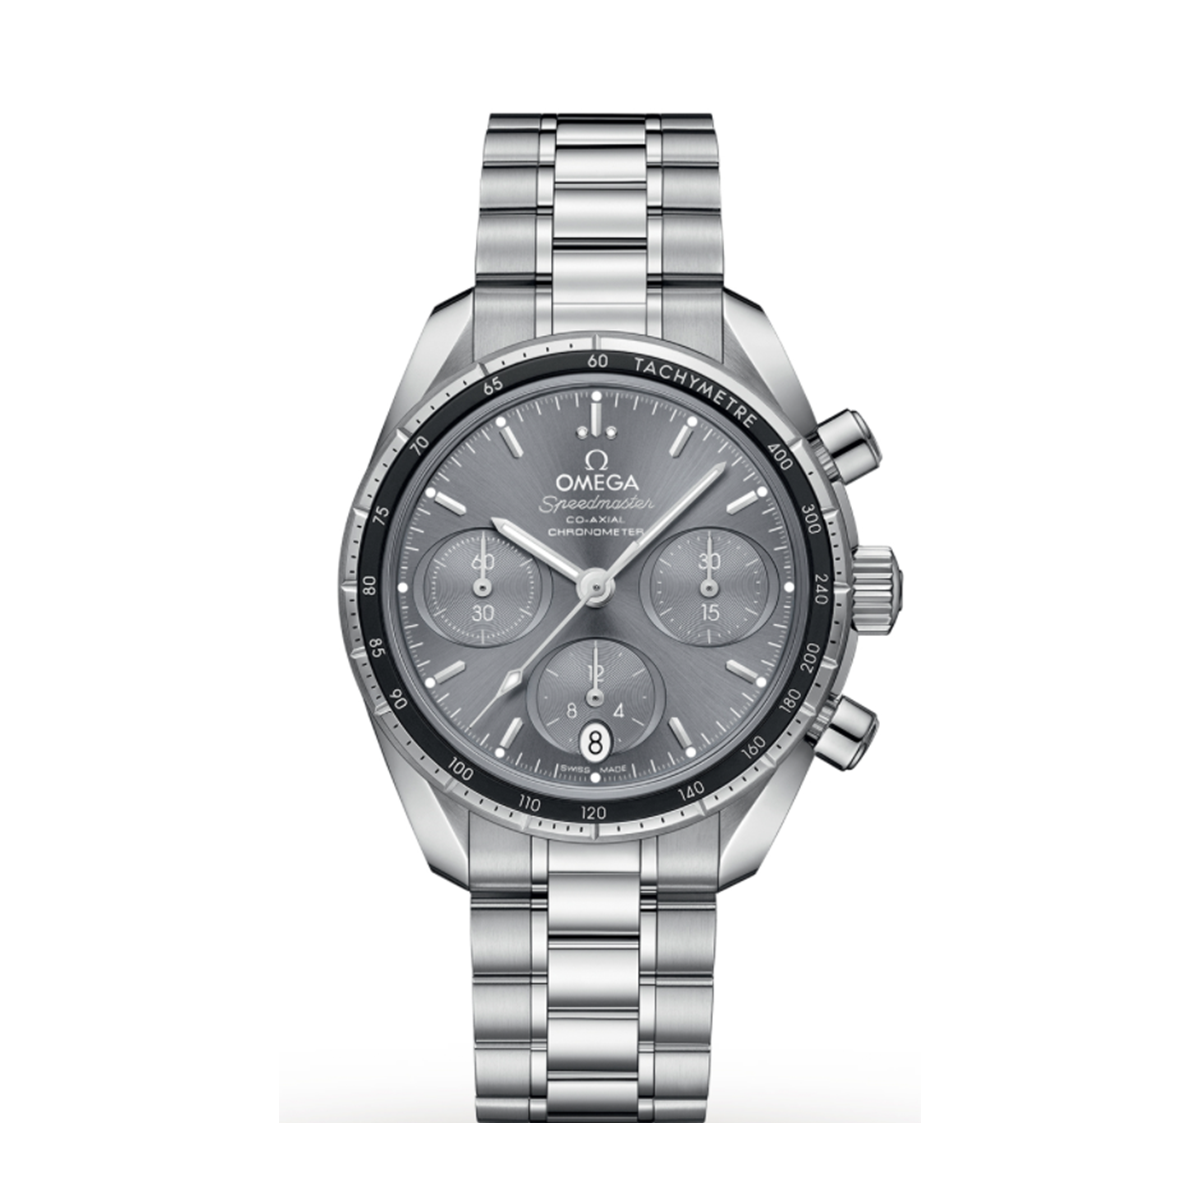 Speedmaster 38 Co-Axial Chronometer Watch